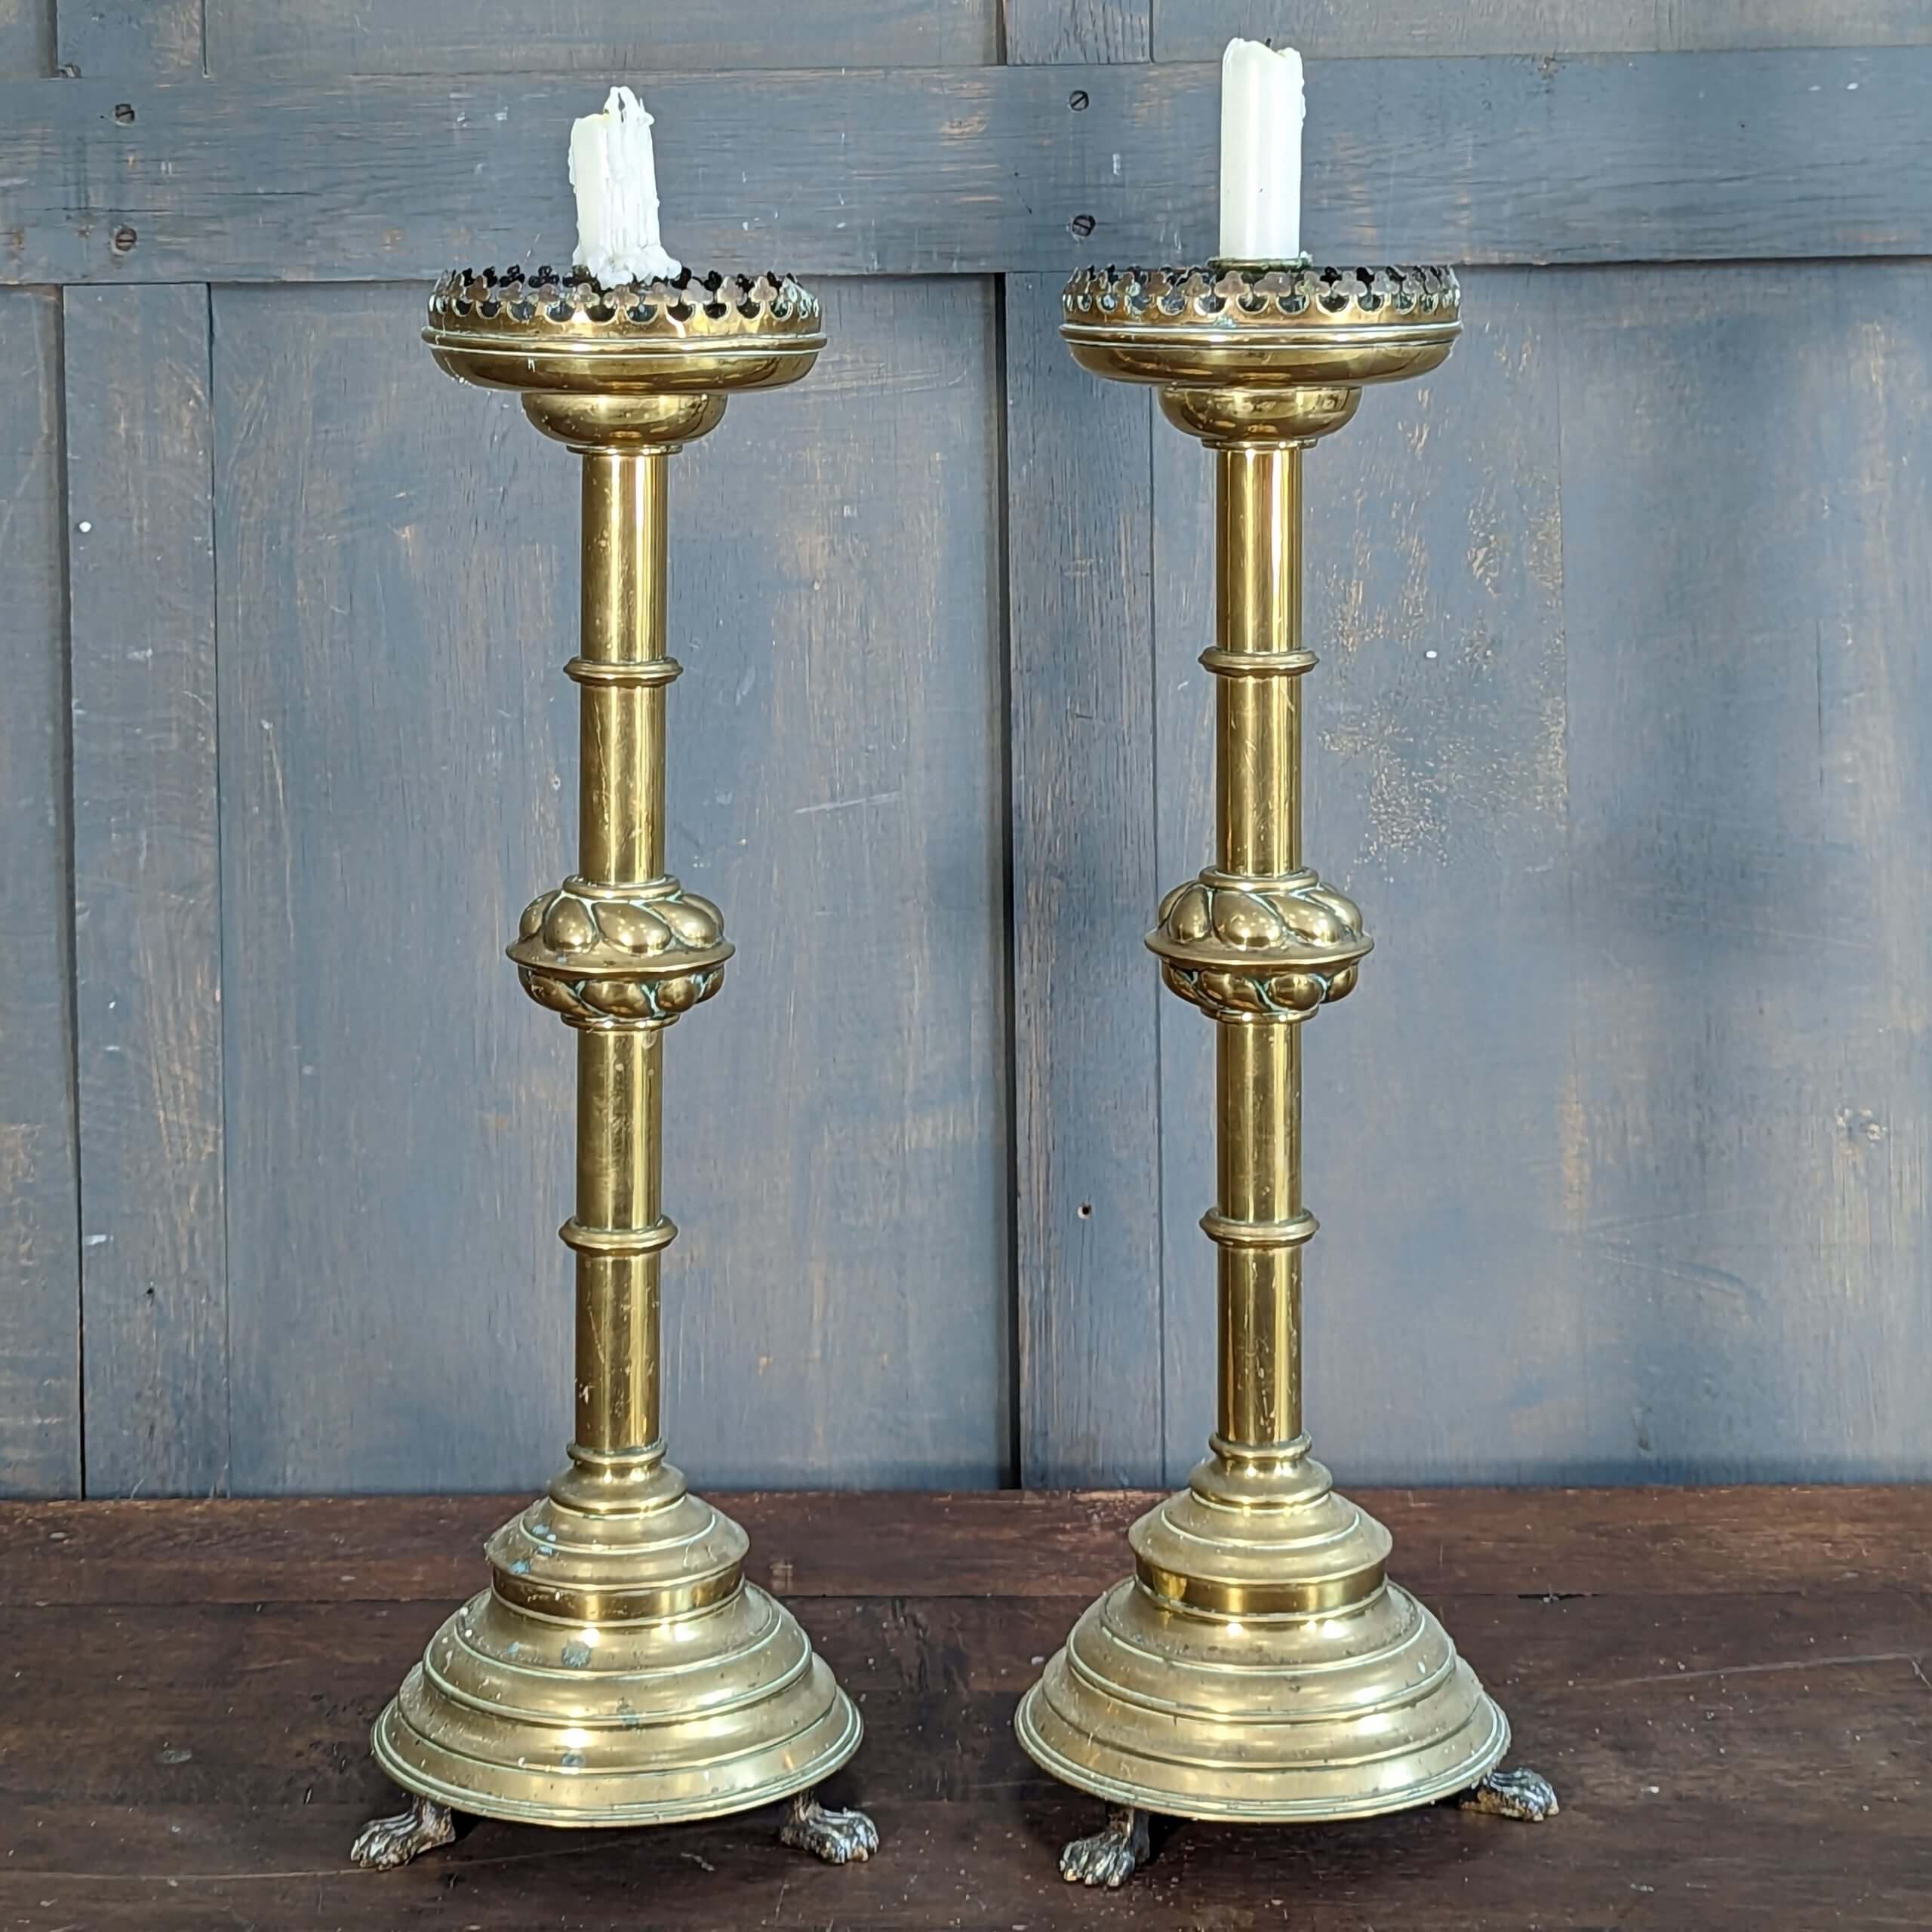 Antique Brass Ornate Religious Gothic Church Altar Candle Holders - Pa